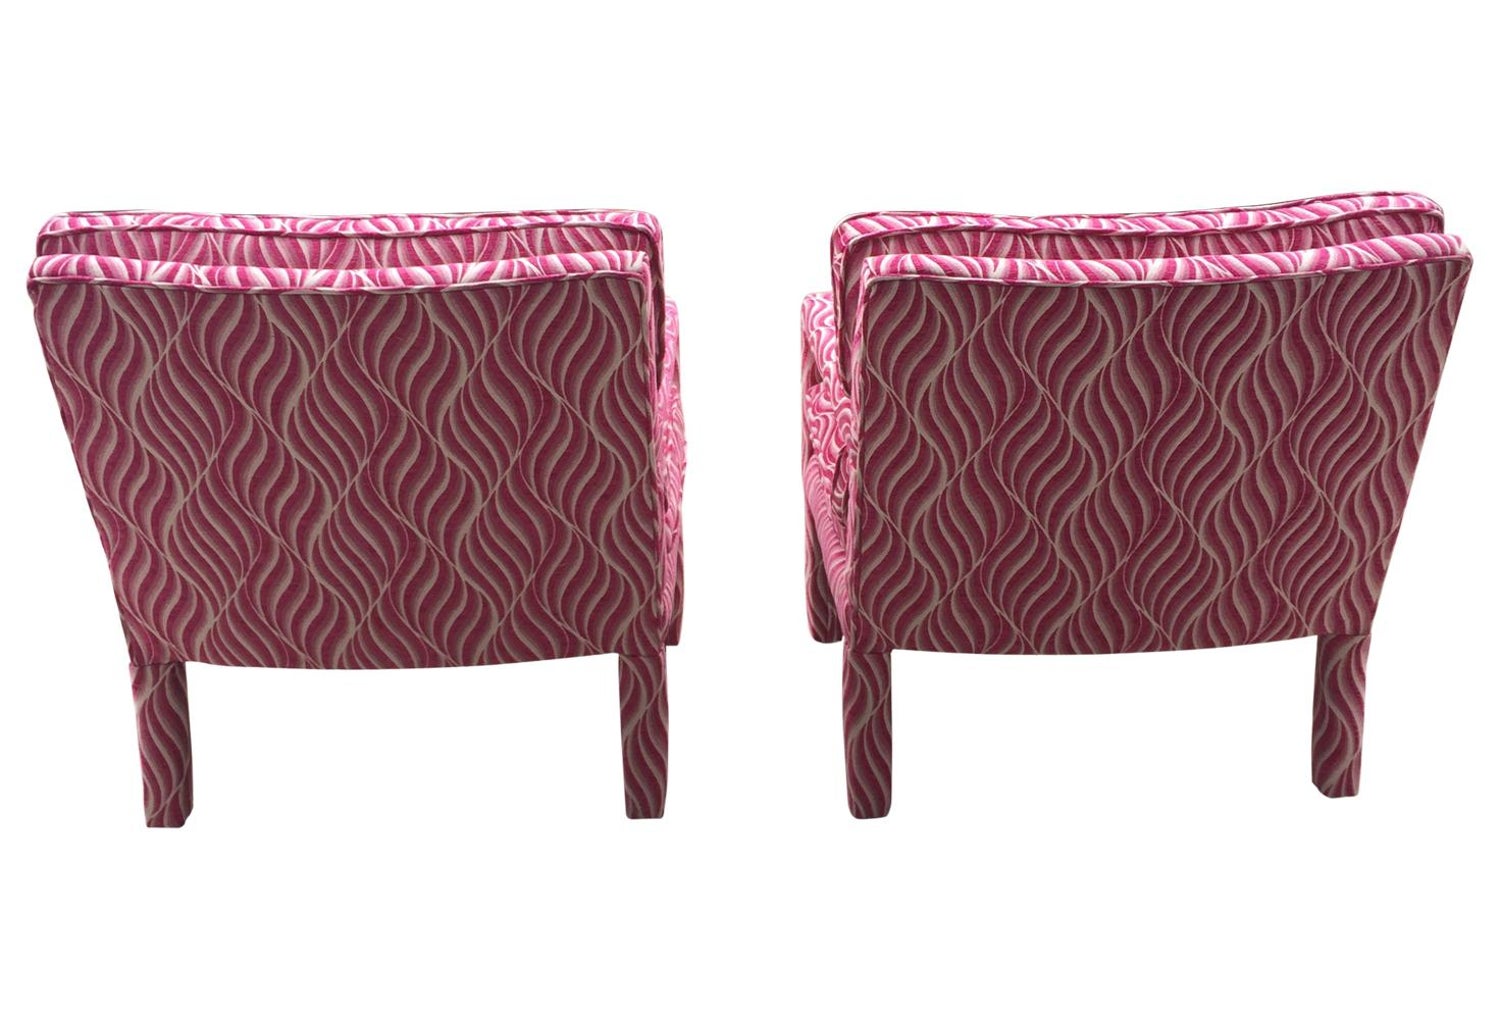 Fuschia Pink And White Animal Print Parsons Chairs At 1stdibs